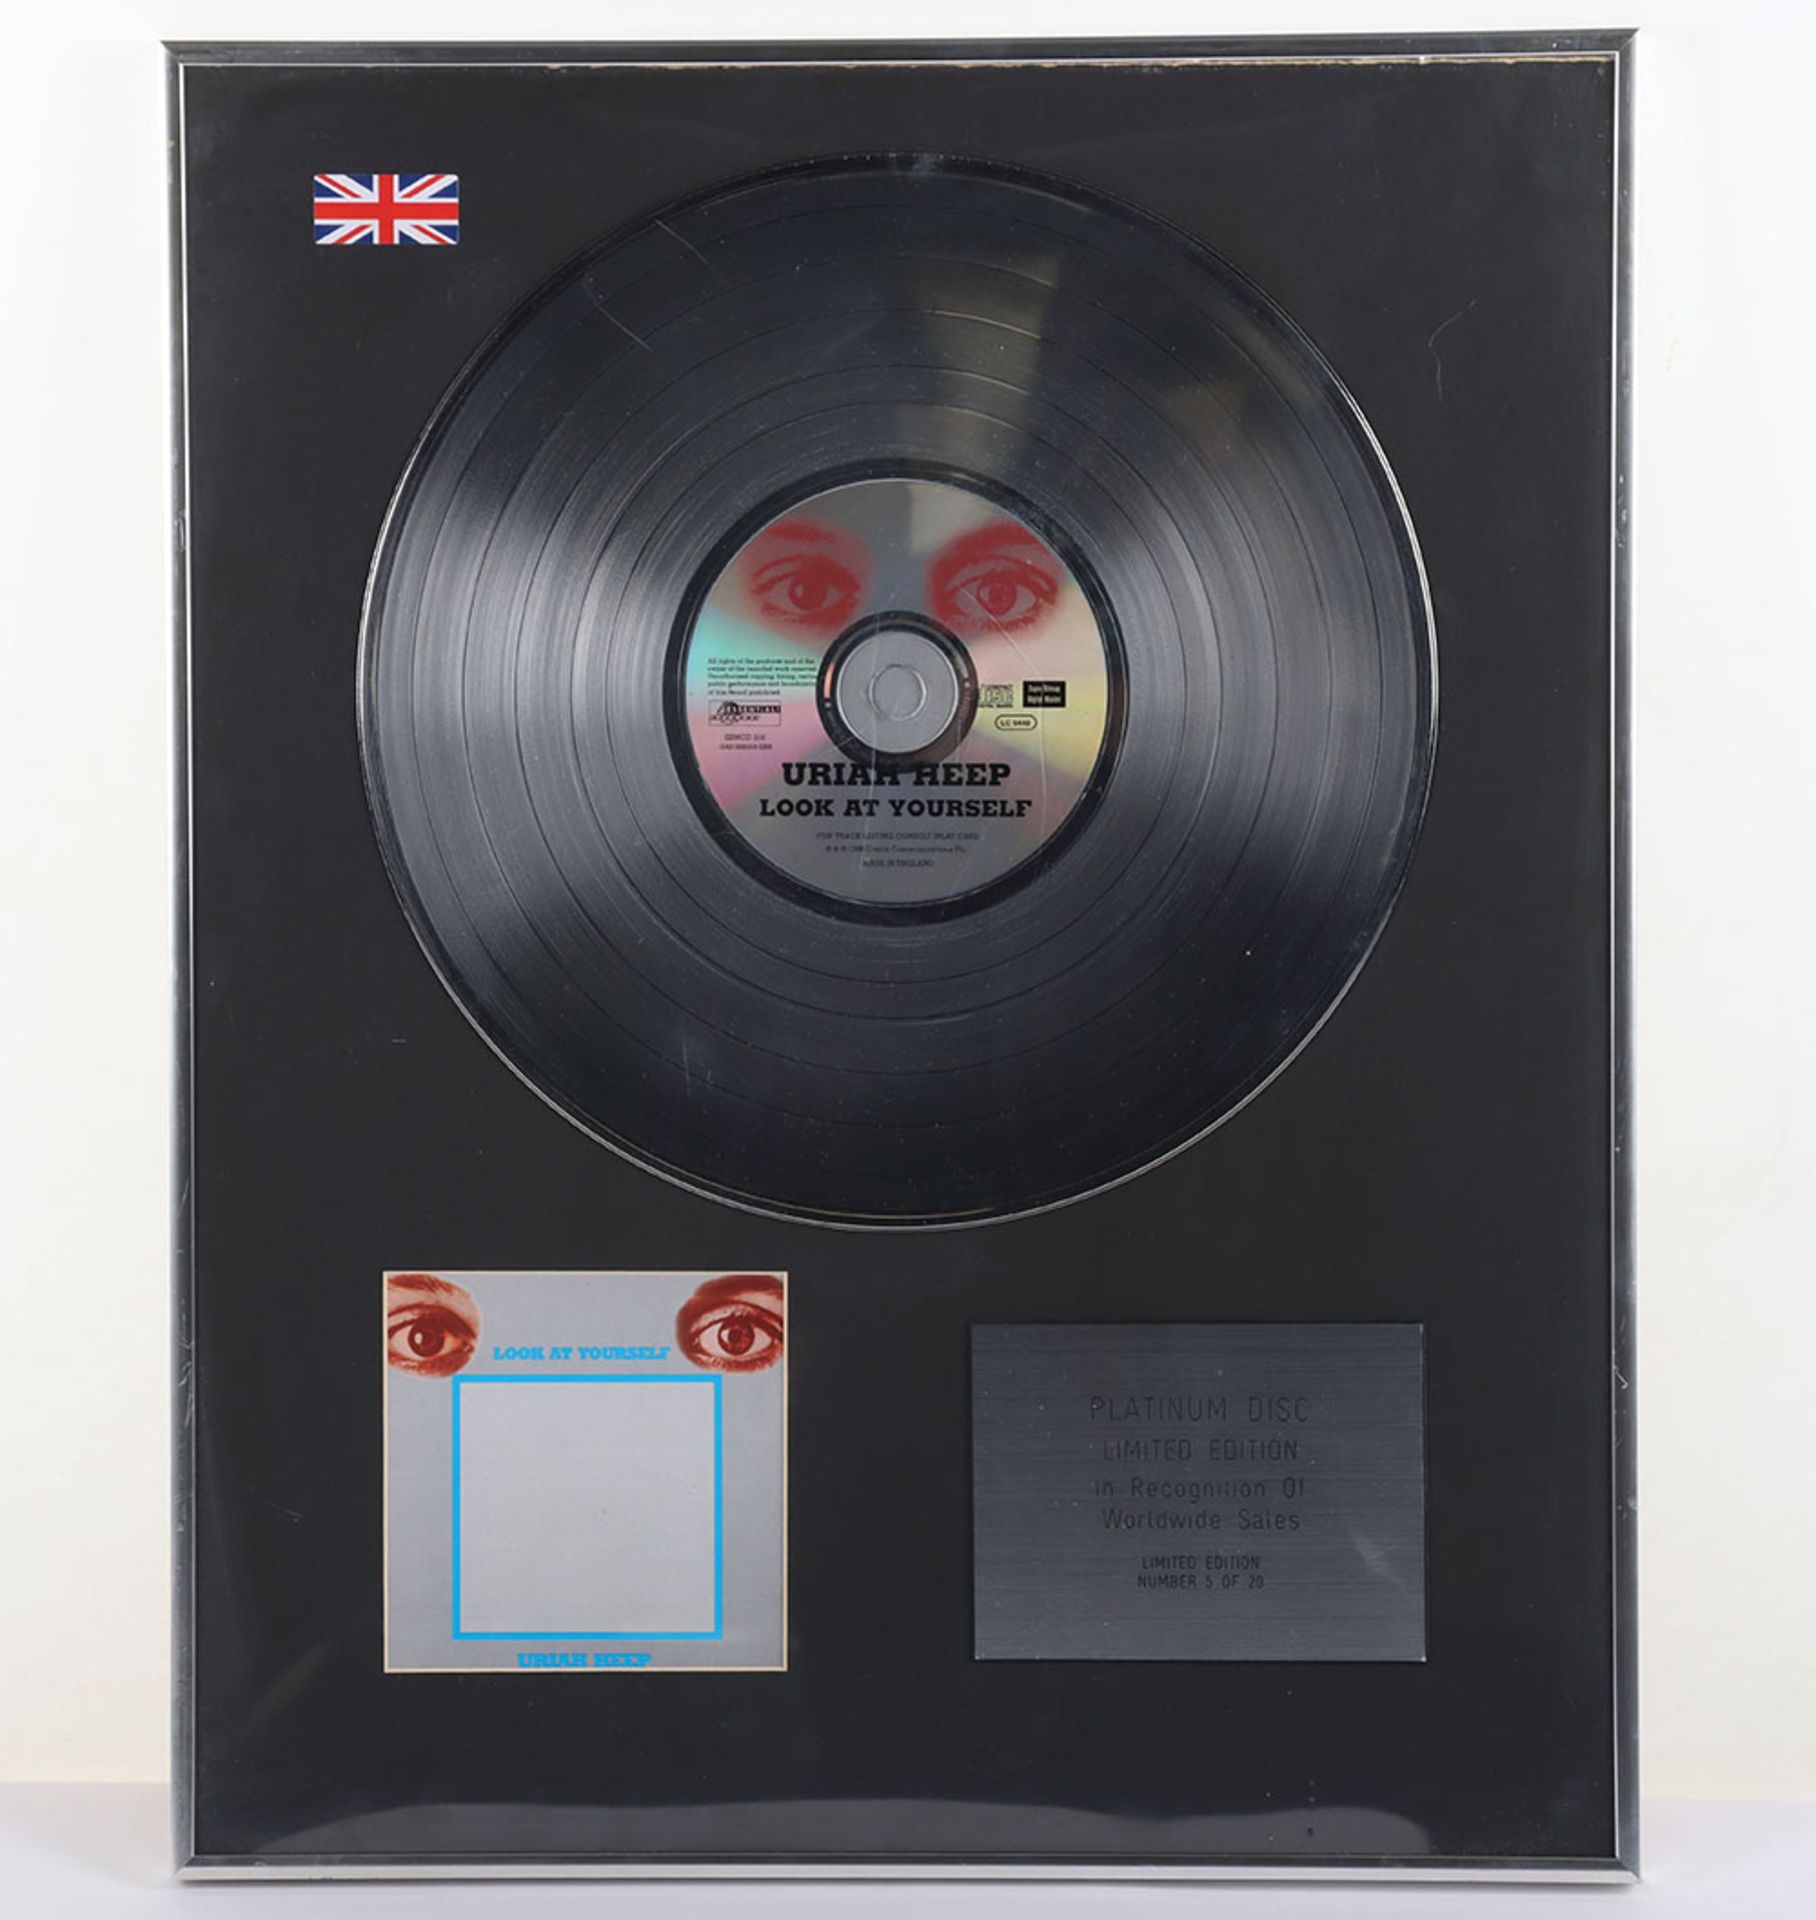 Uriah Heep Platinum Disc Look At Yourself Limited Edition In Recognition of Worldwide Sales